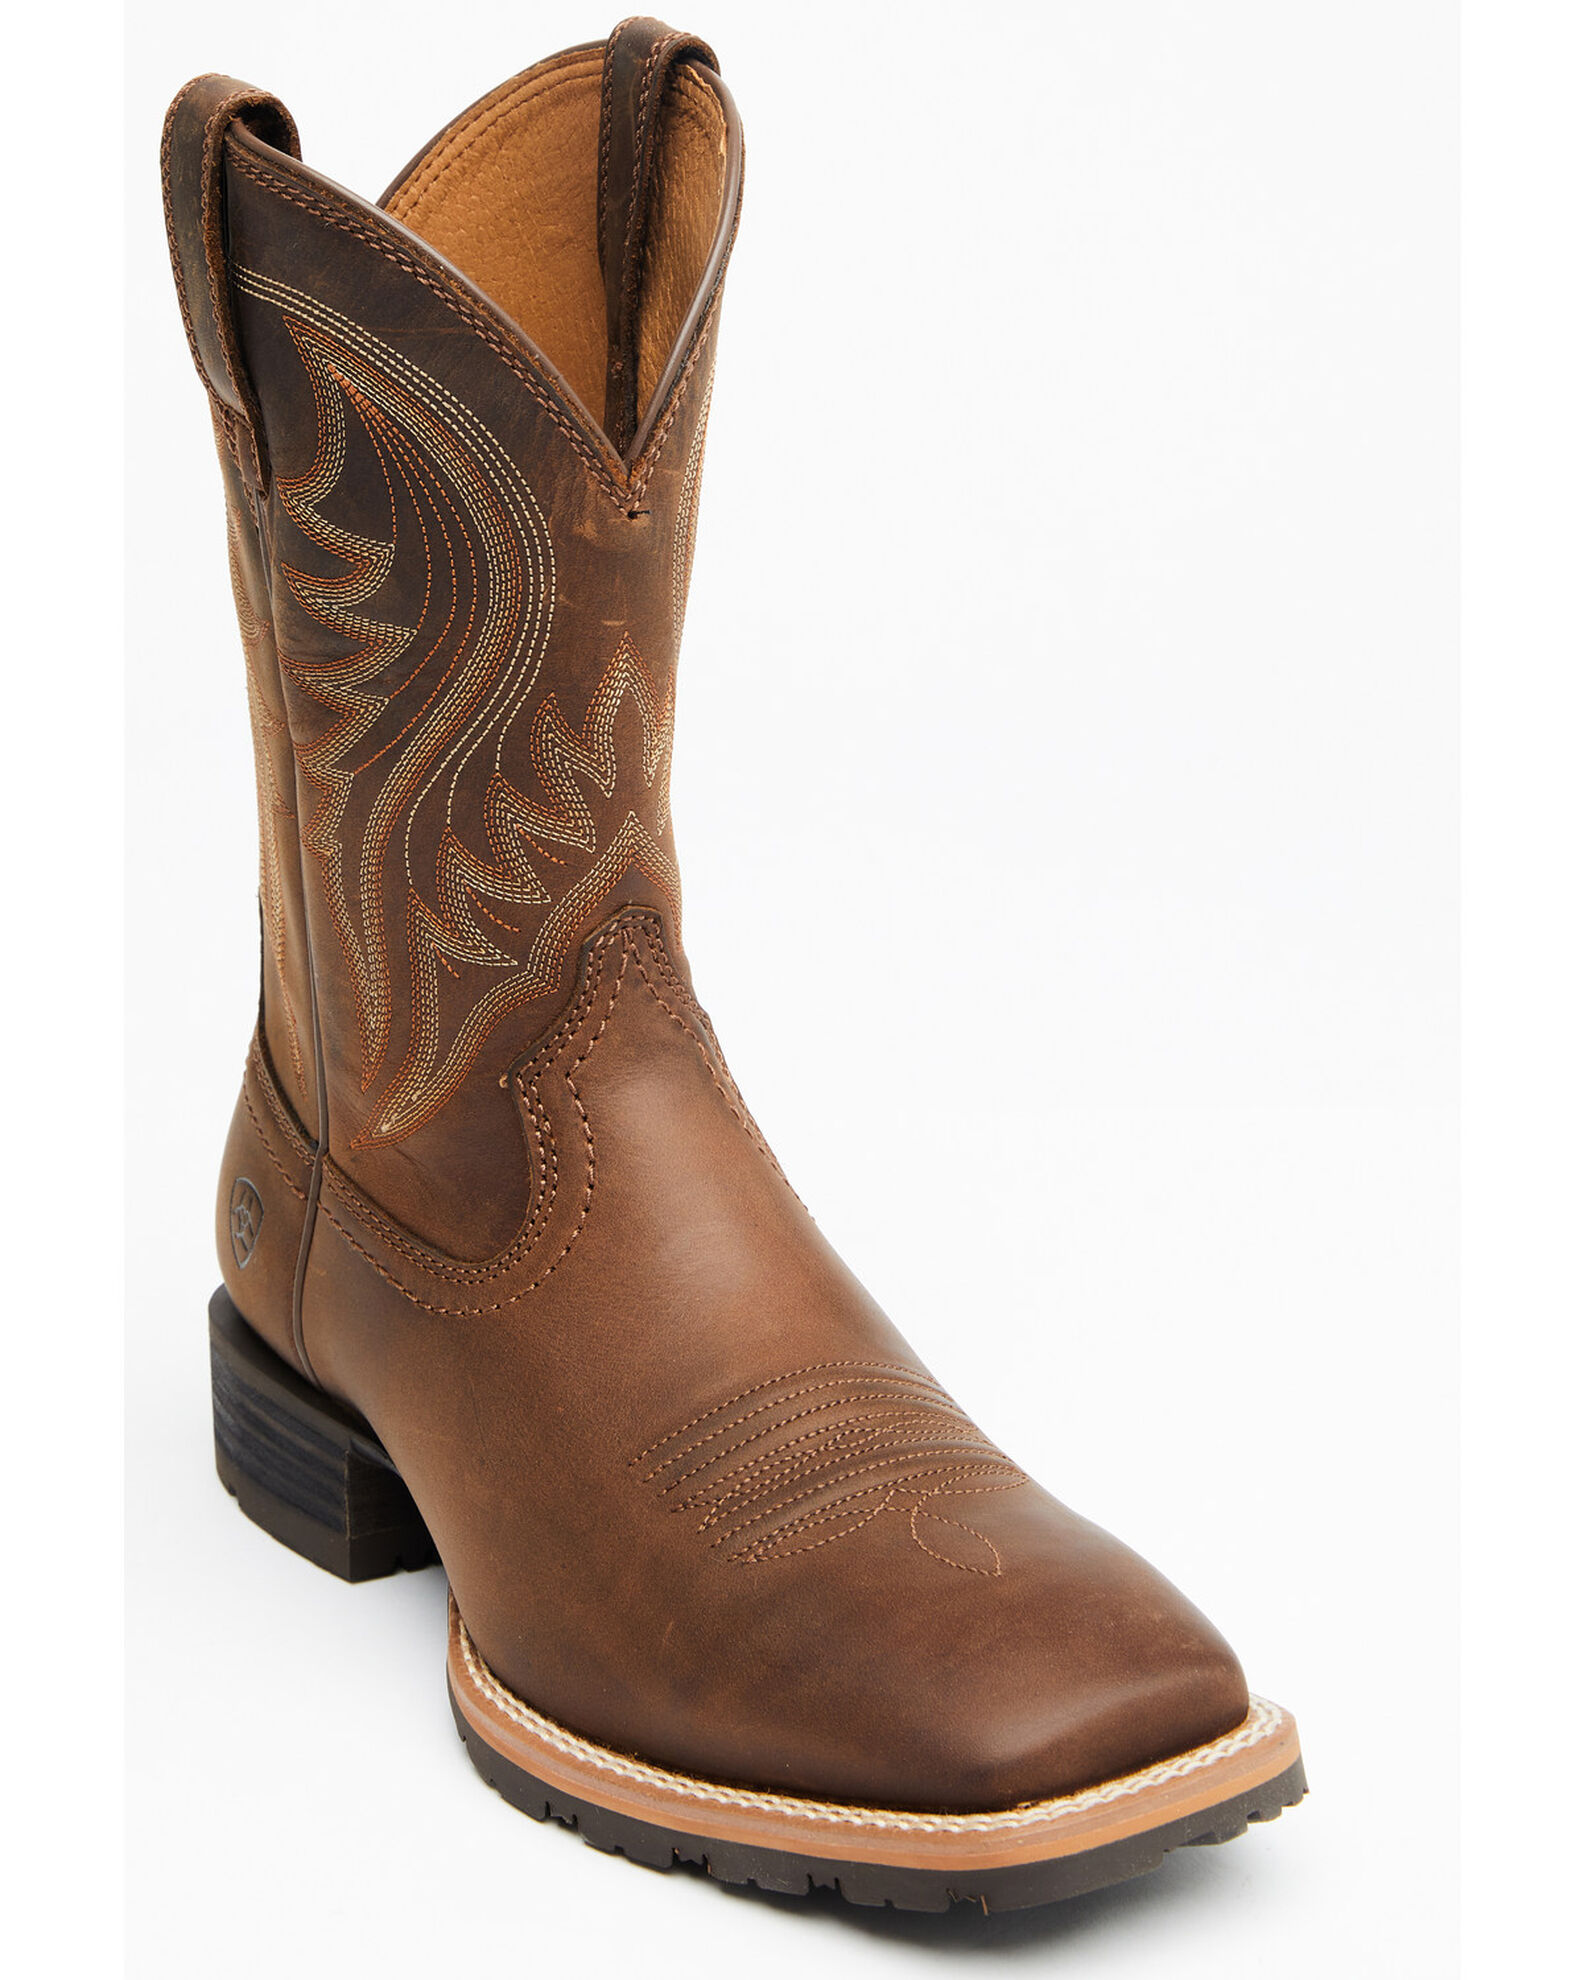 Men's Ariat Hybrid Rancher, Adult, Size: 11, Distressed Brown Leather